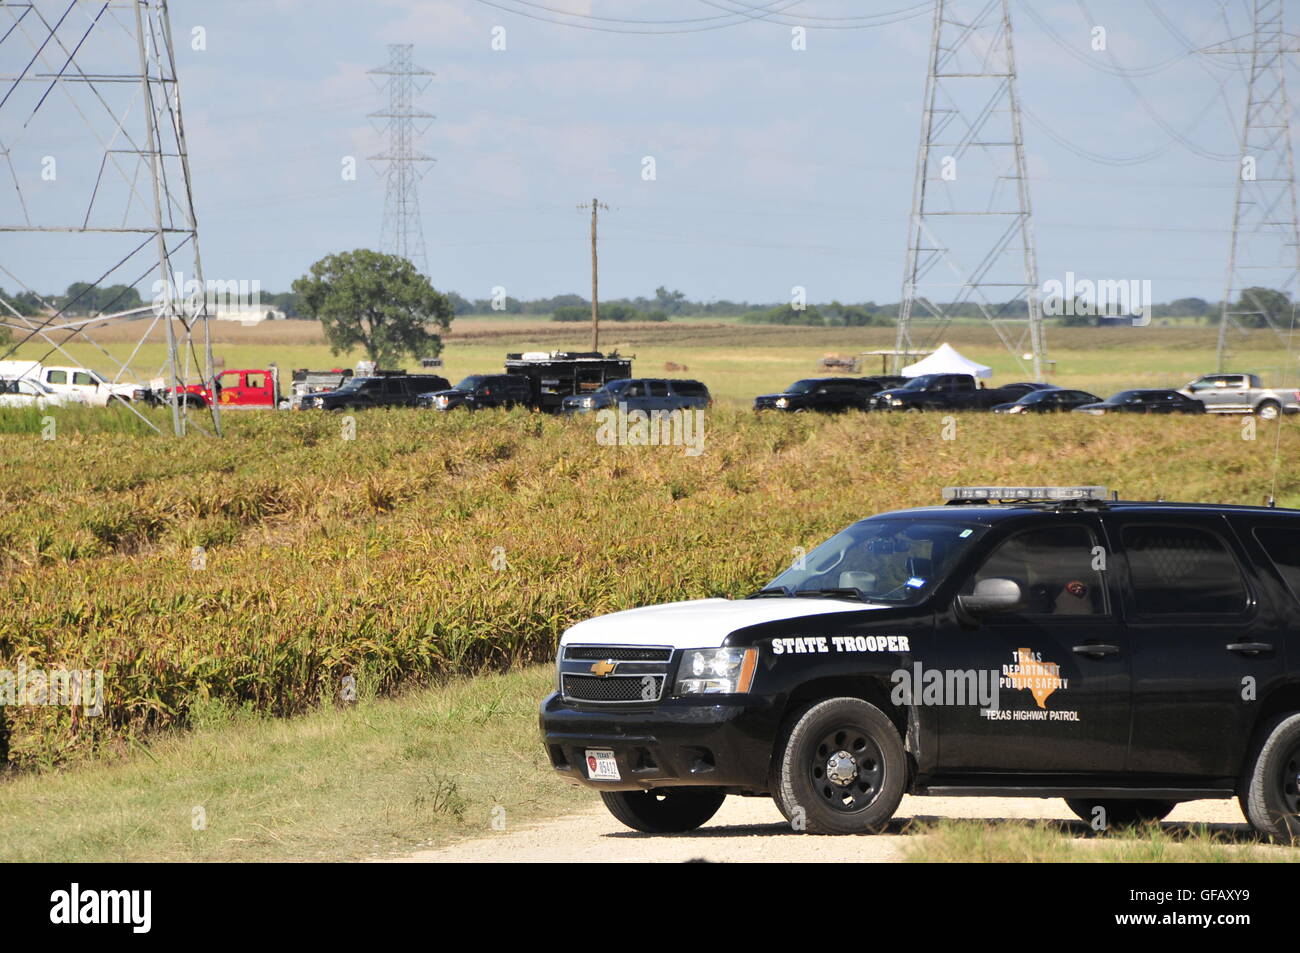 (160731) -- LOCKHART, July 31, 2016 (Xinhua) -- Local police seal off the site of a balloon crash accident near Lockhart, a city in the central part of the U.S. state of Texas, July 30, 2016. U.S. Texas Department of PUBLIC Safety has confirmed that 16 people were killed on Saturday morning after a hot air balloon caught on fire and crashed near Lockhart. The accident occurred shortly after 7:40 a.m. local time on Saturday near Lockhart, when the hot air balloon with at least 16 people on board crashed into a pasture, the Federal Aviation Administration (FAA) said in a statement on Saturday. ( Stock Photo